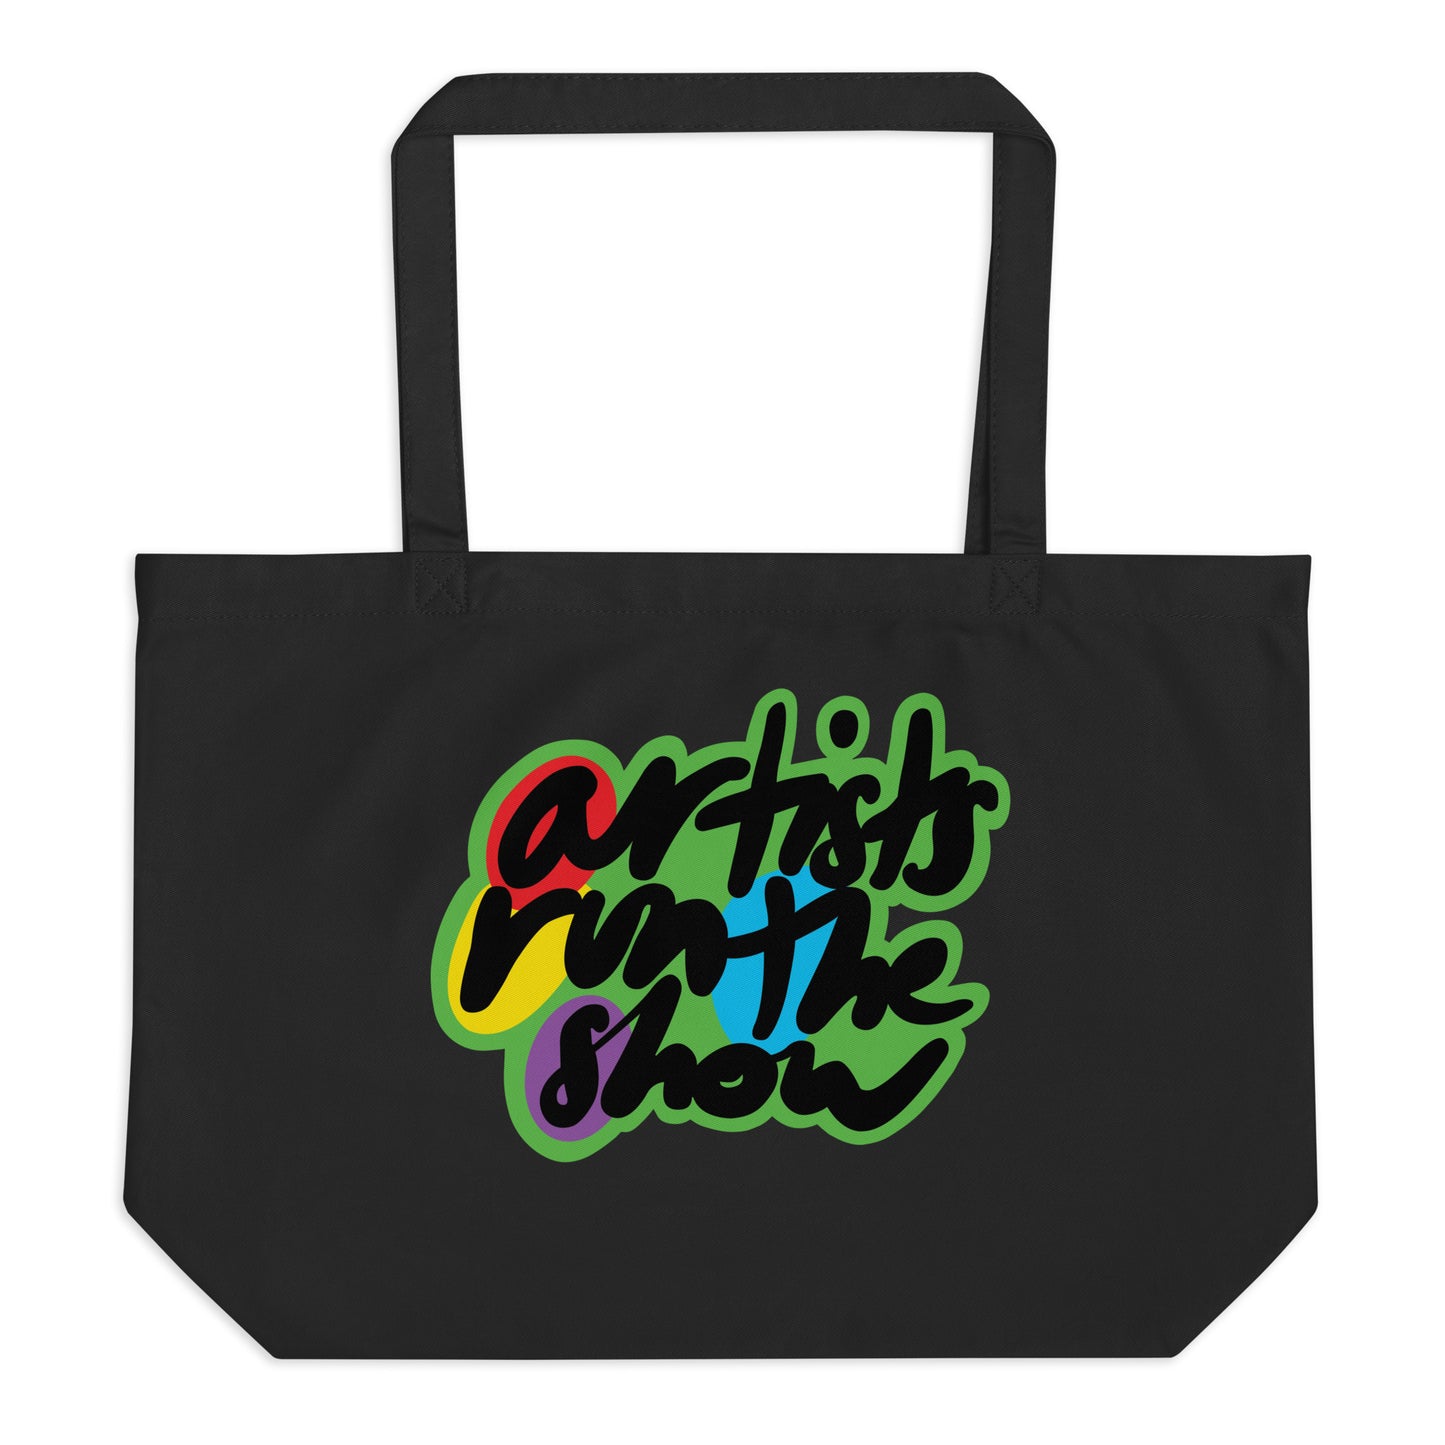 Artists Run the Show - Large organic tote bag